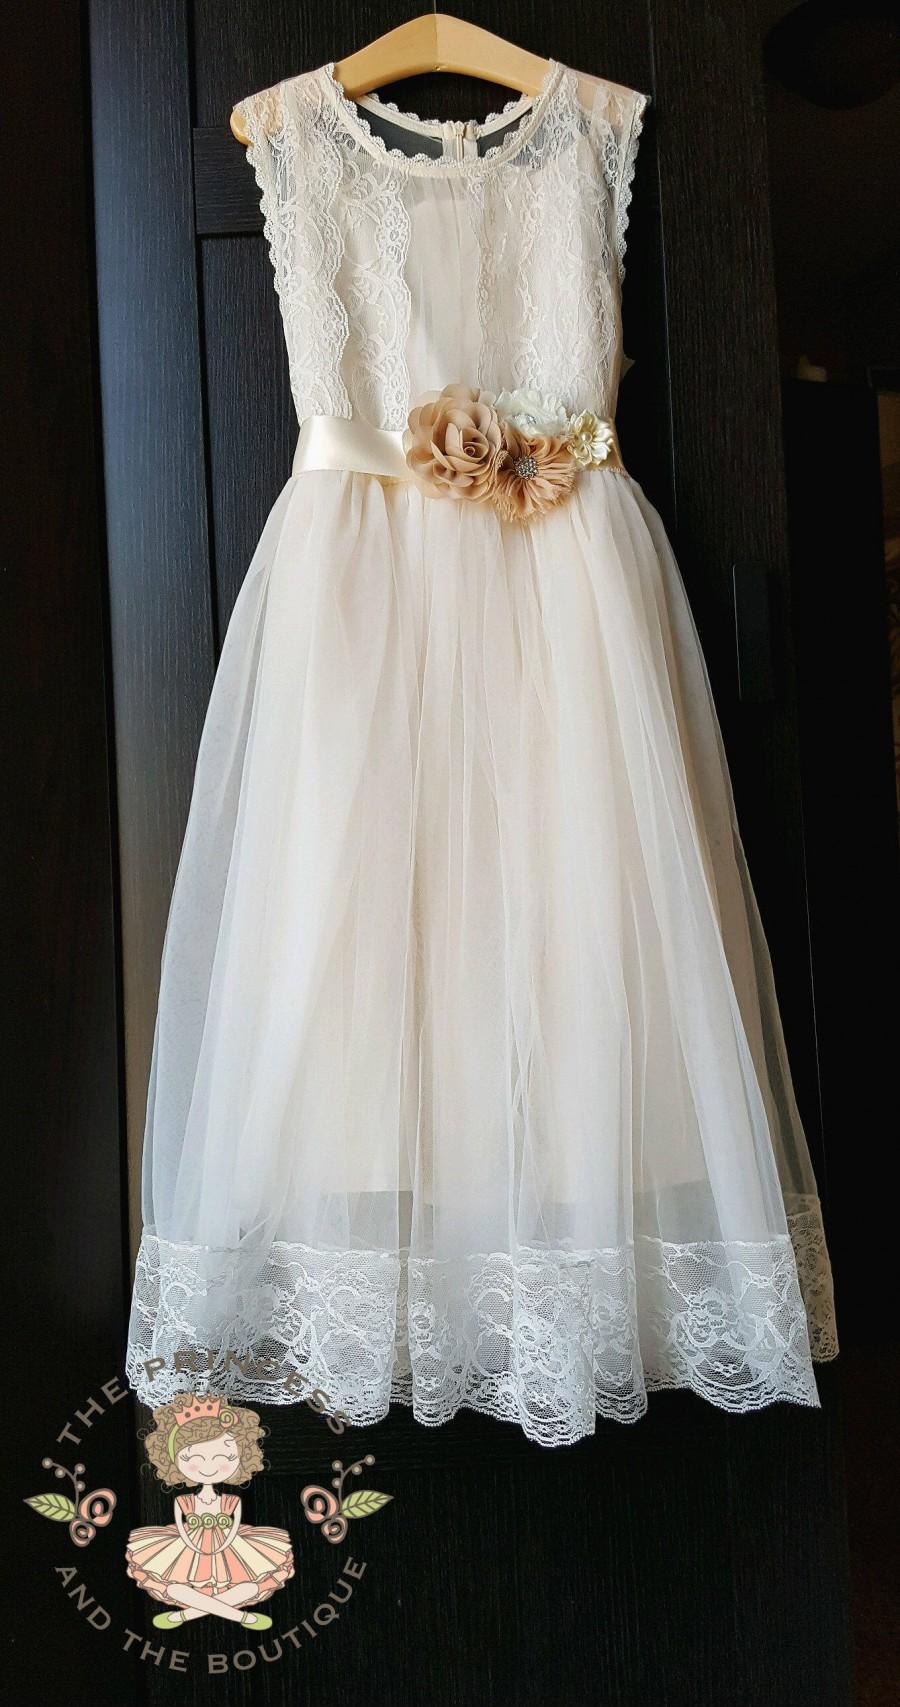 Mariage - Champagne flower girl dress with sash, flower girl dress, flower girl lace dress, girls dress, rustic wedding, lace girls dress